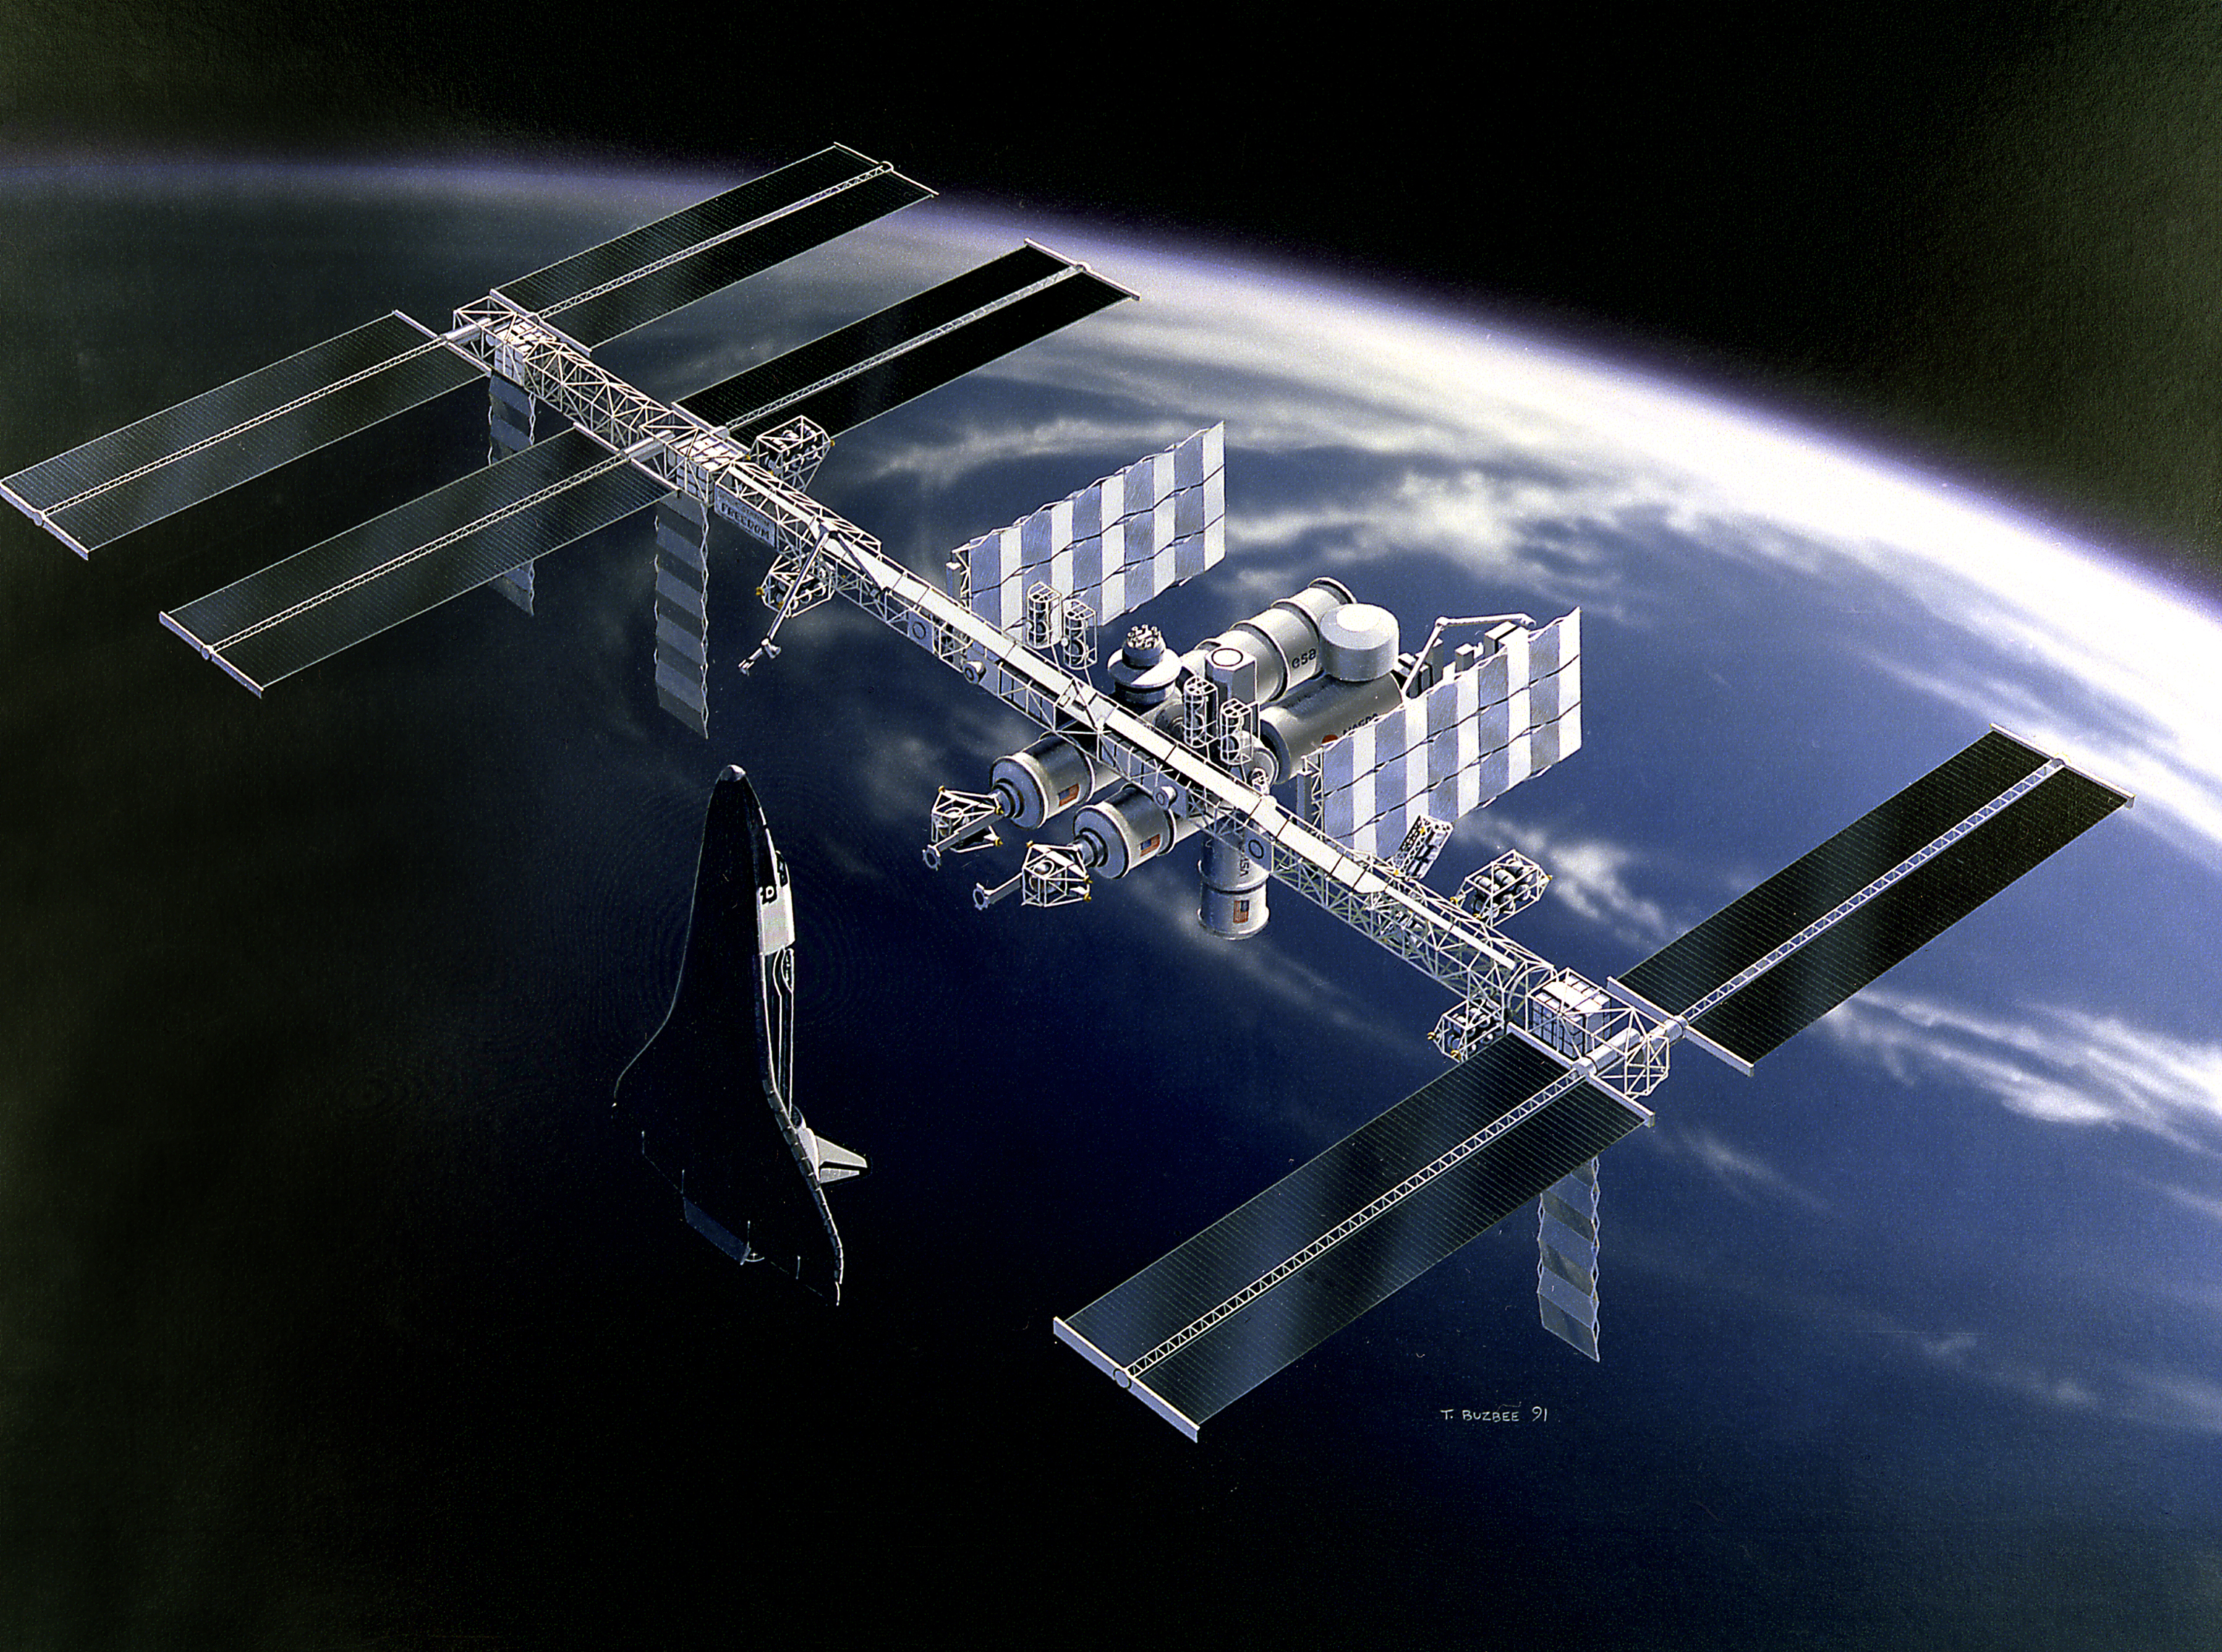 Space Station Freedom - Wikipedia